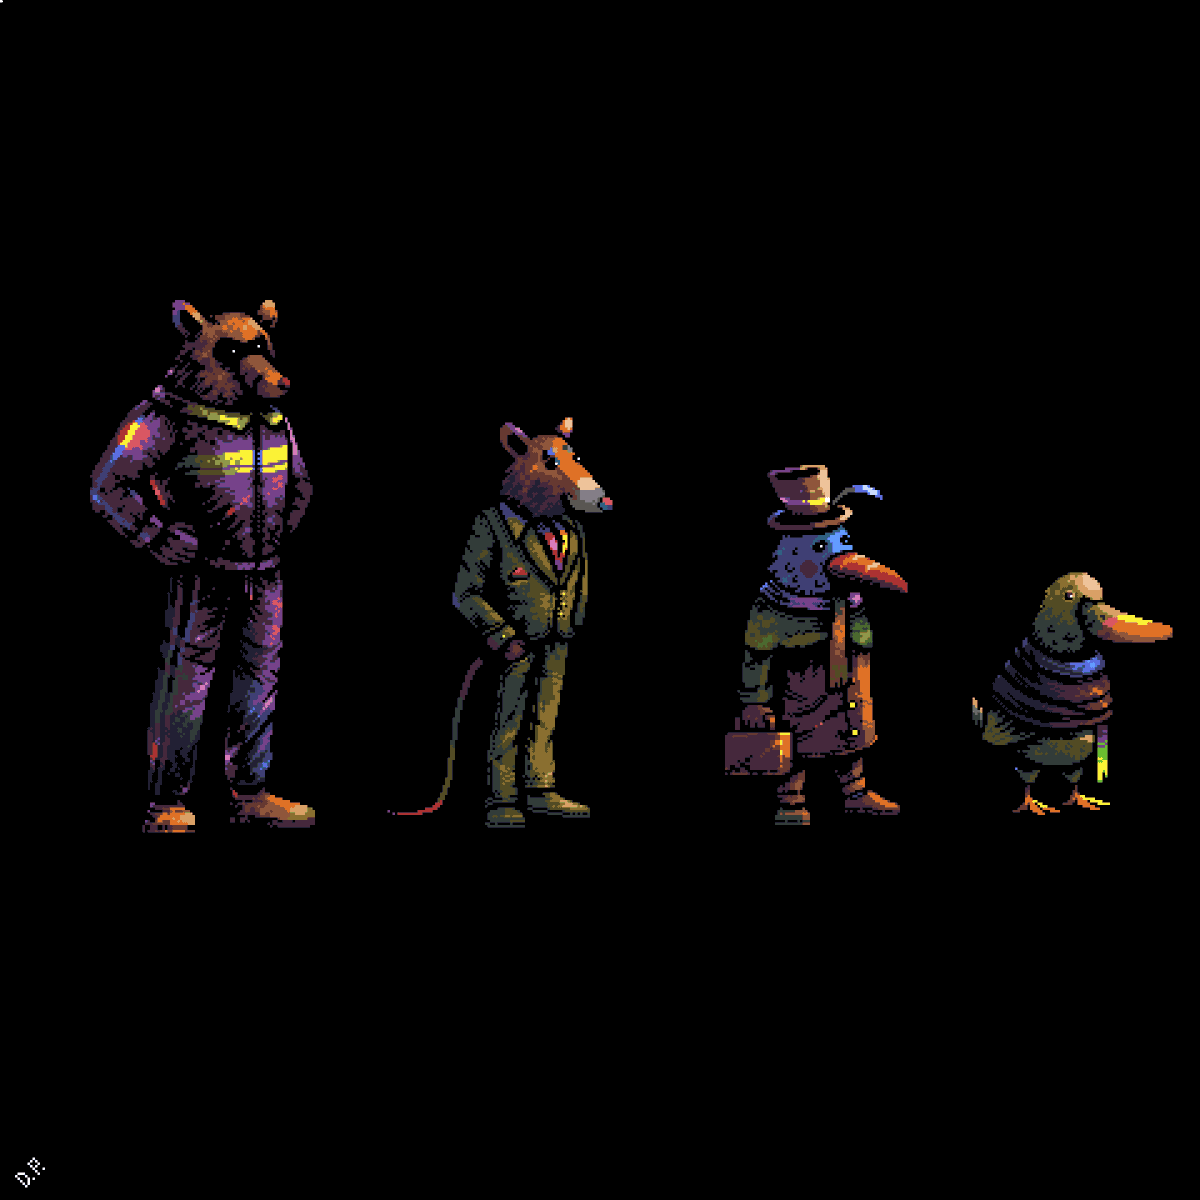 I mostly draw backgrounds, but sometimes also draw characters
#characterdesign #pixelart #ドット絵 